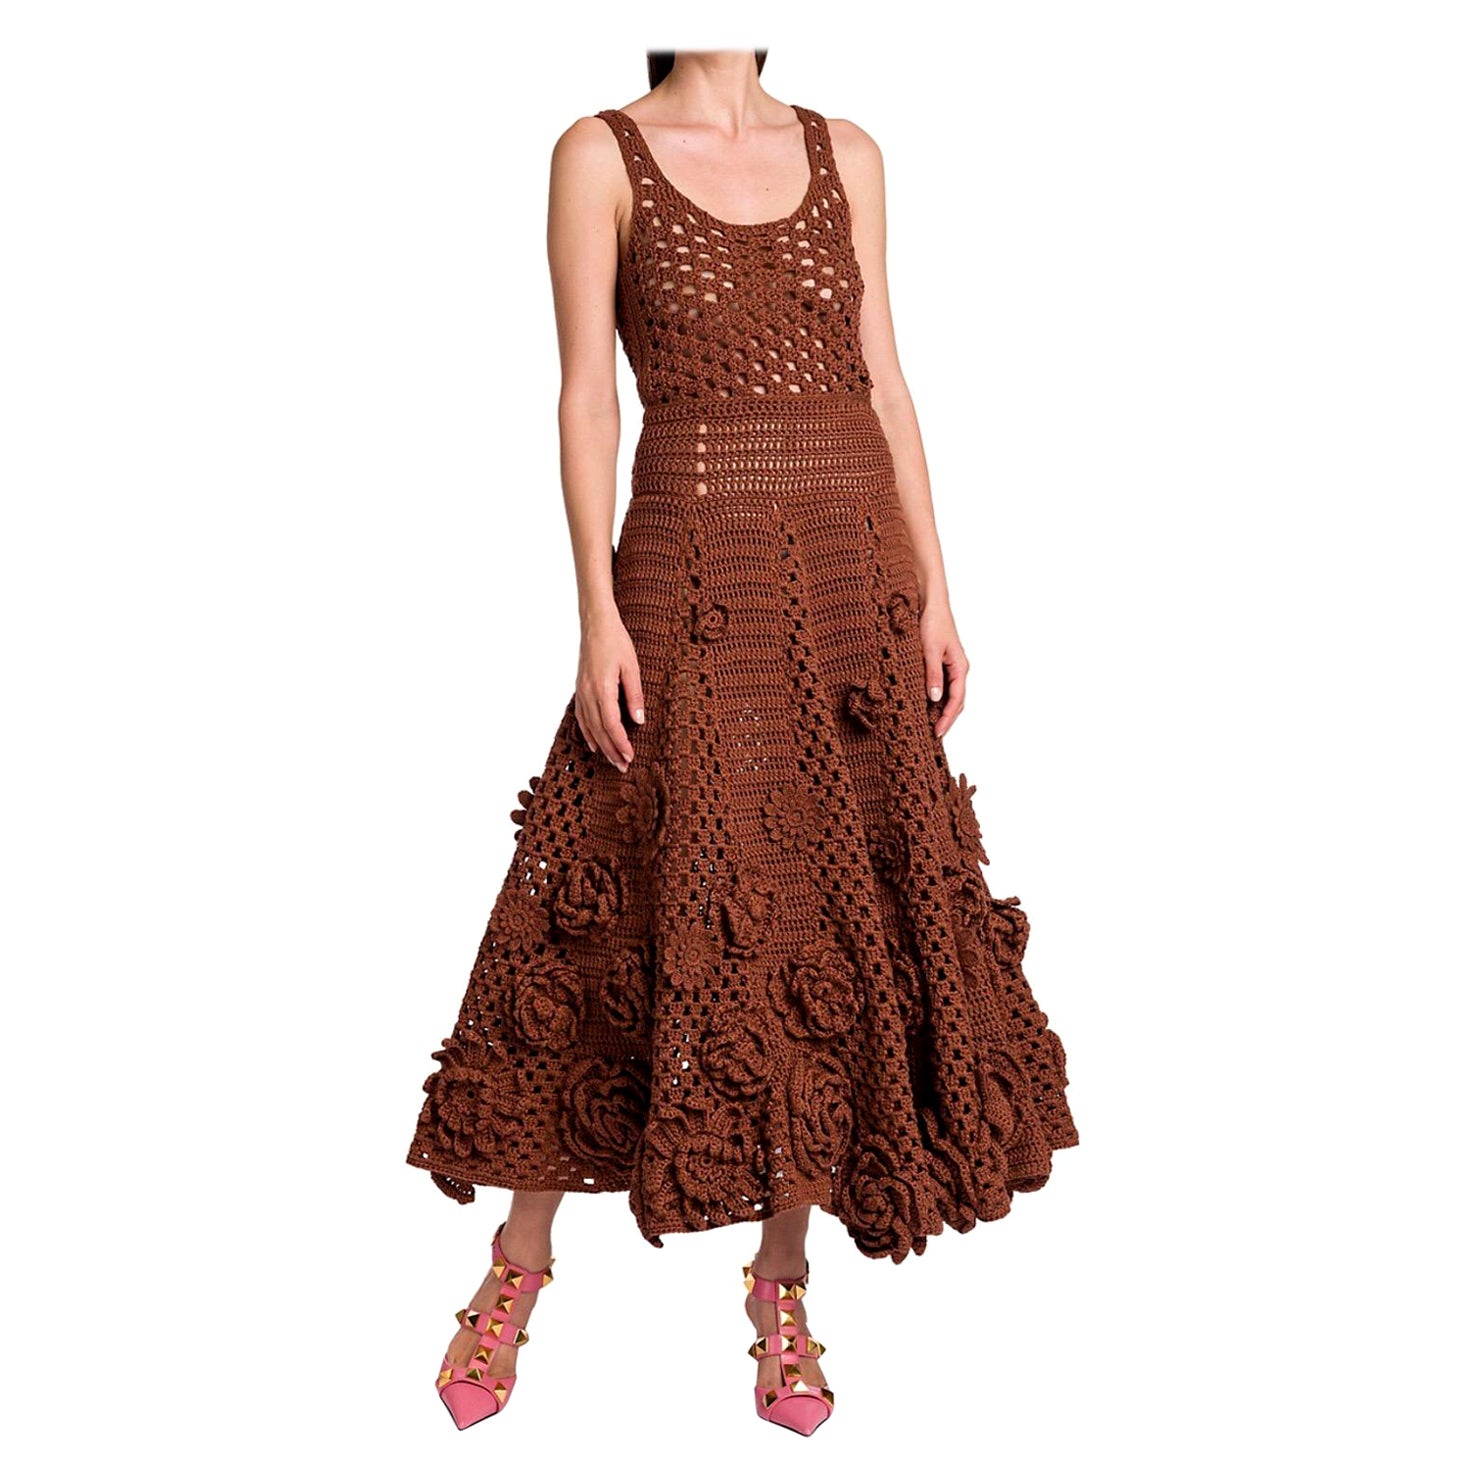 Valentino Spring/Summer 2021 Floral Open-Knit Cotton Midi Dress in Caramel For Sale